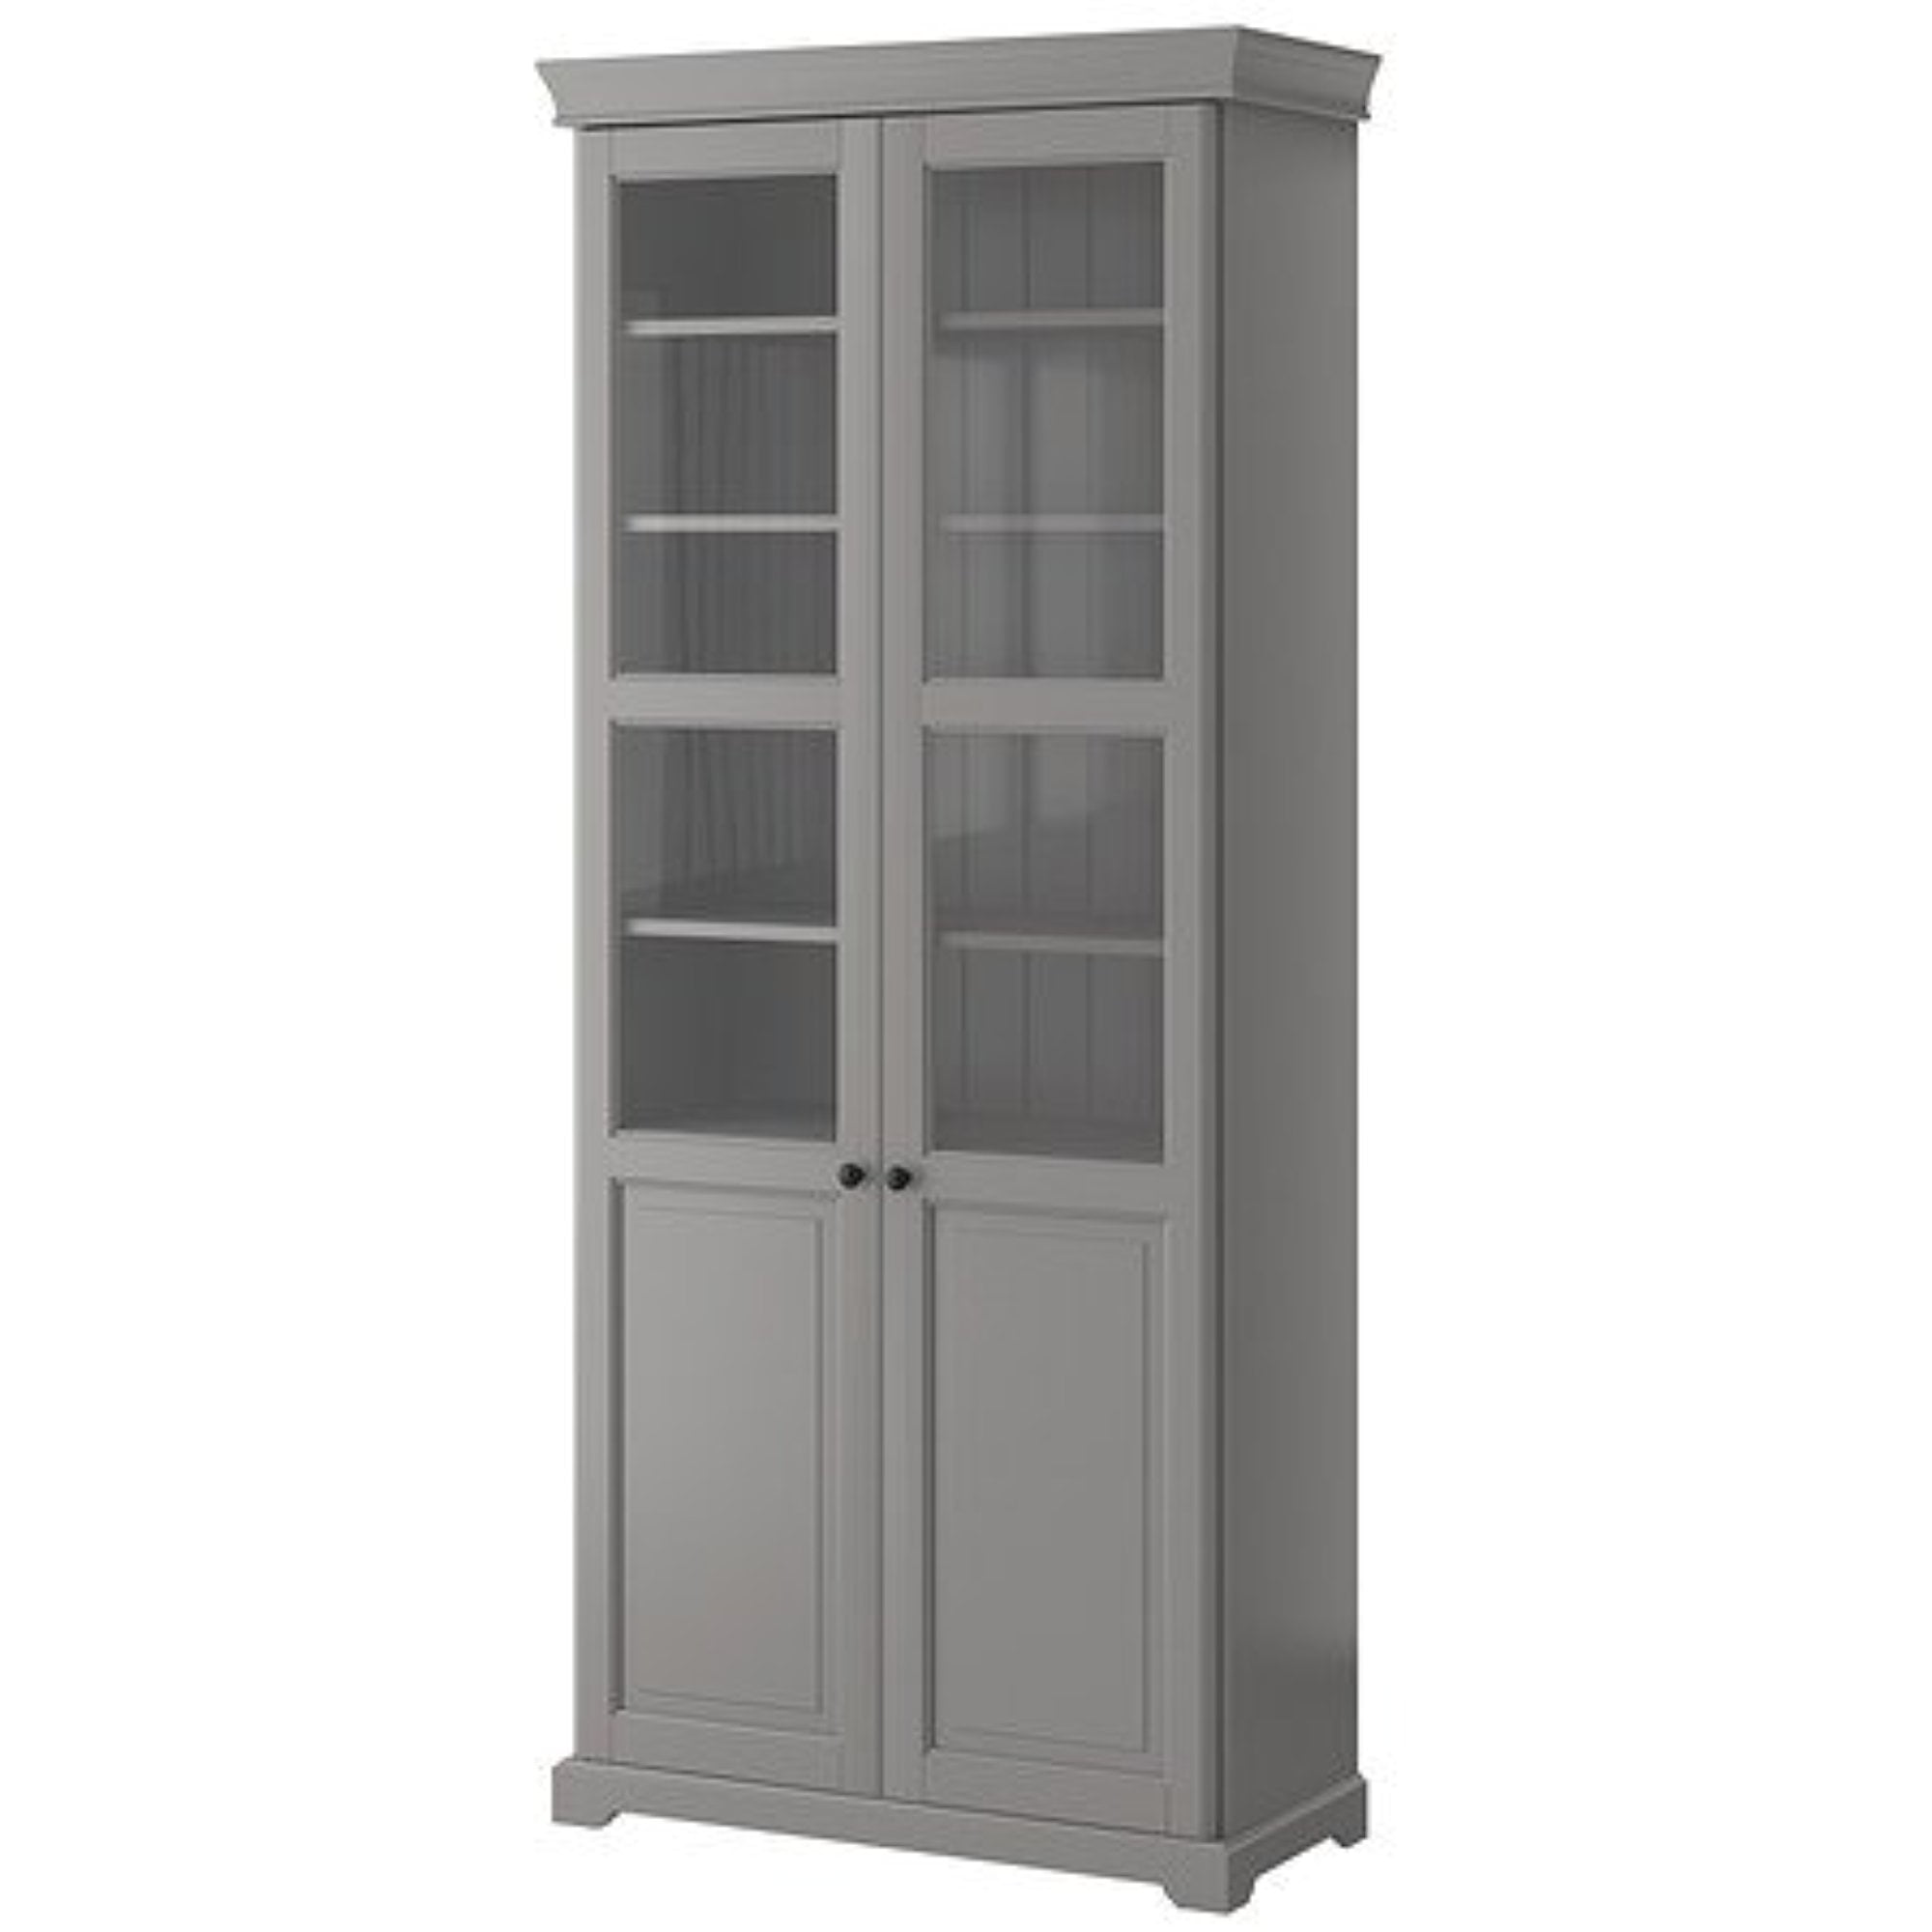 Ikea Bookcase With Glass Doors Gray, Ikea White Bookcase With Doors